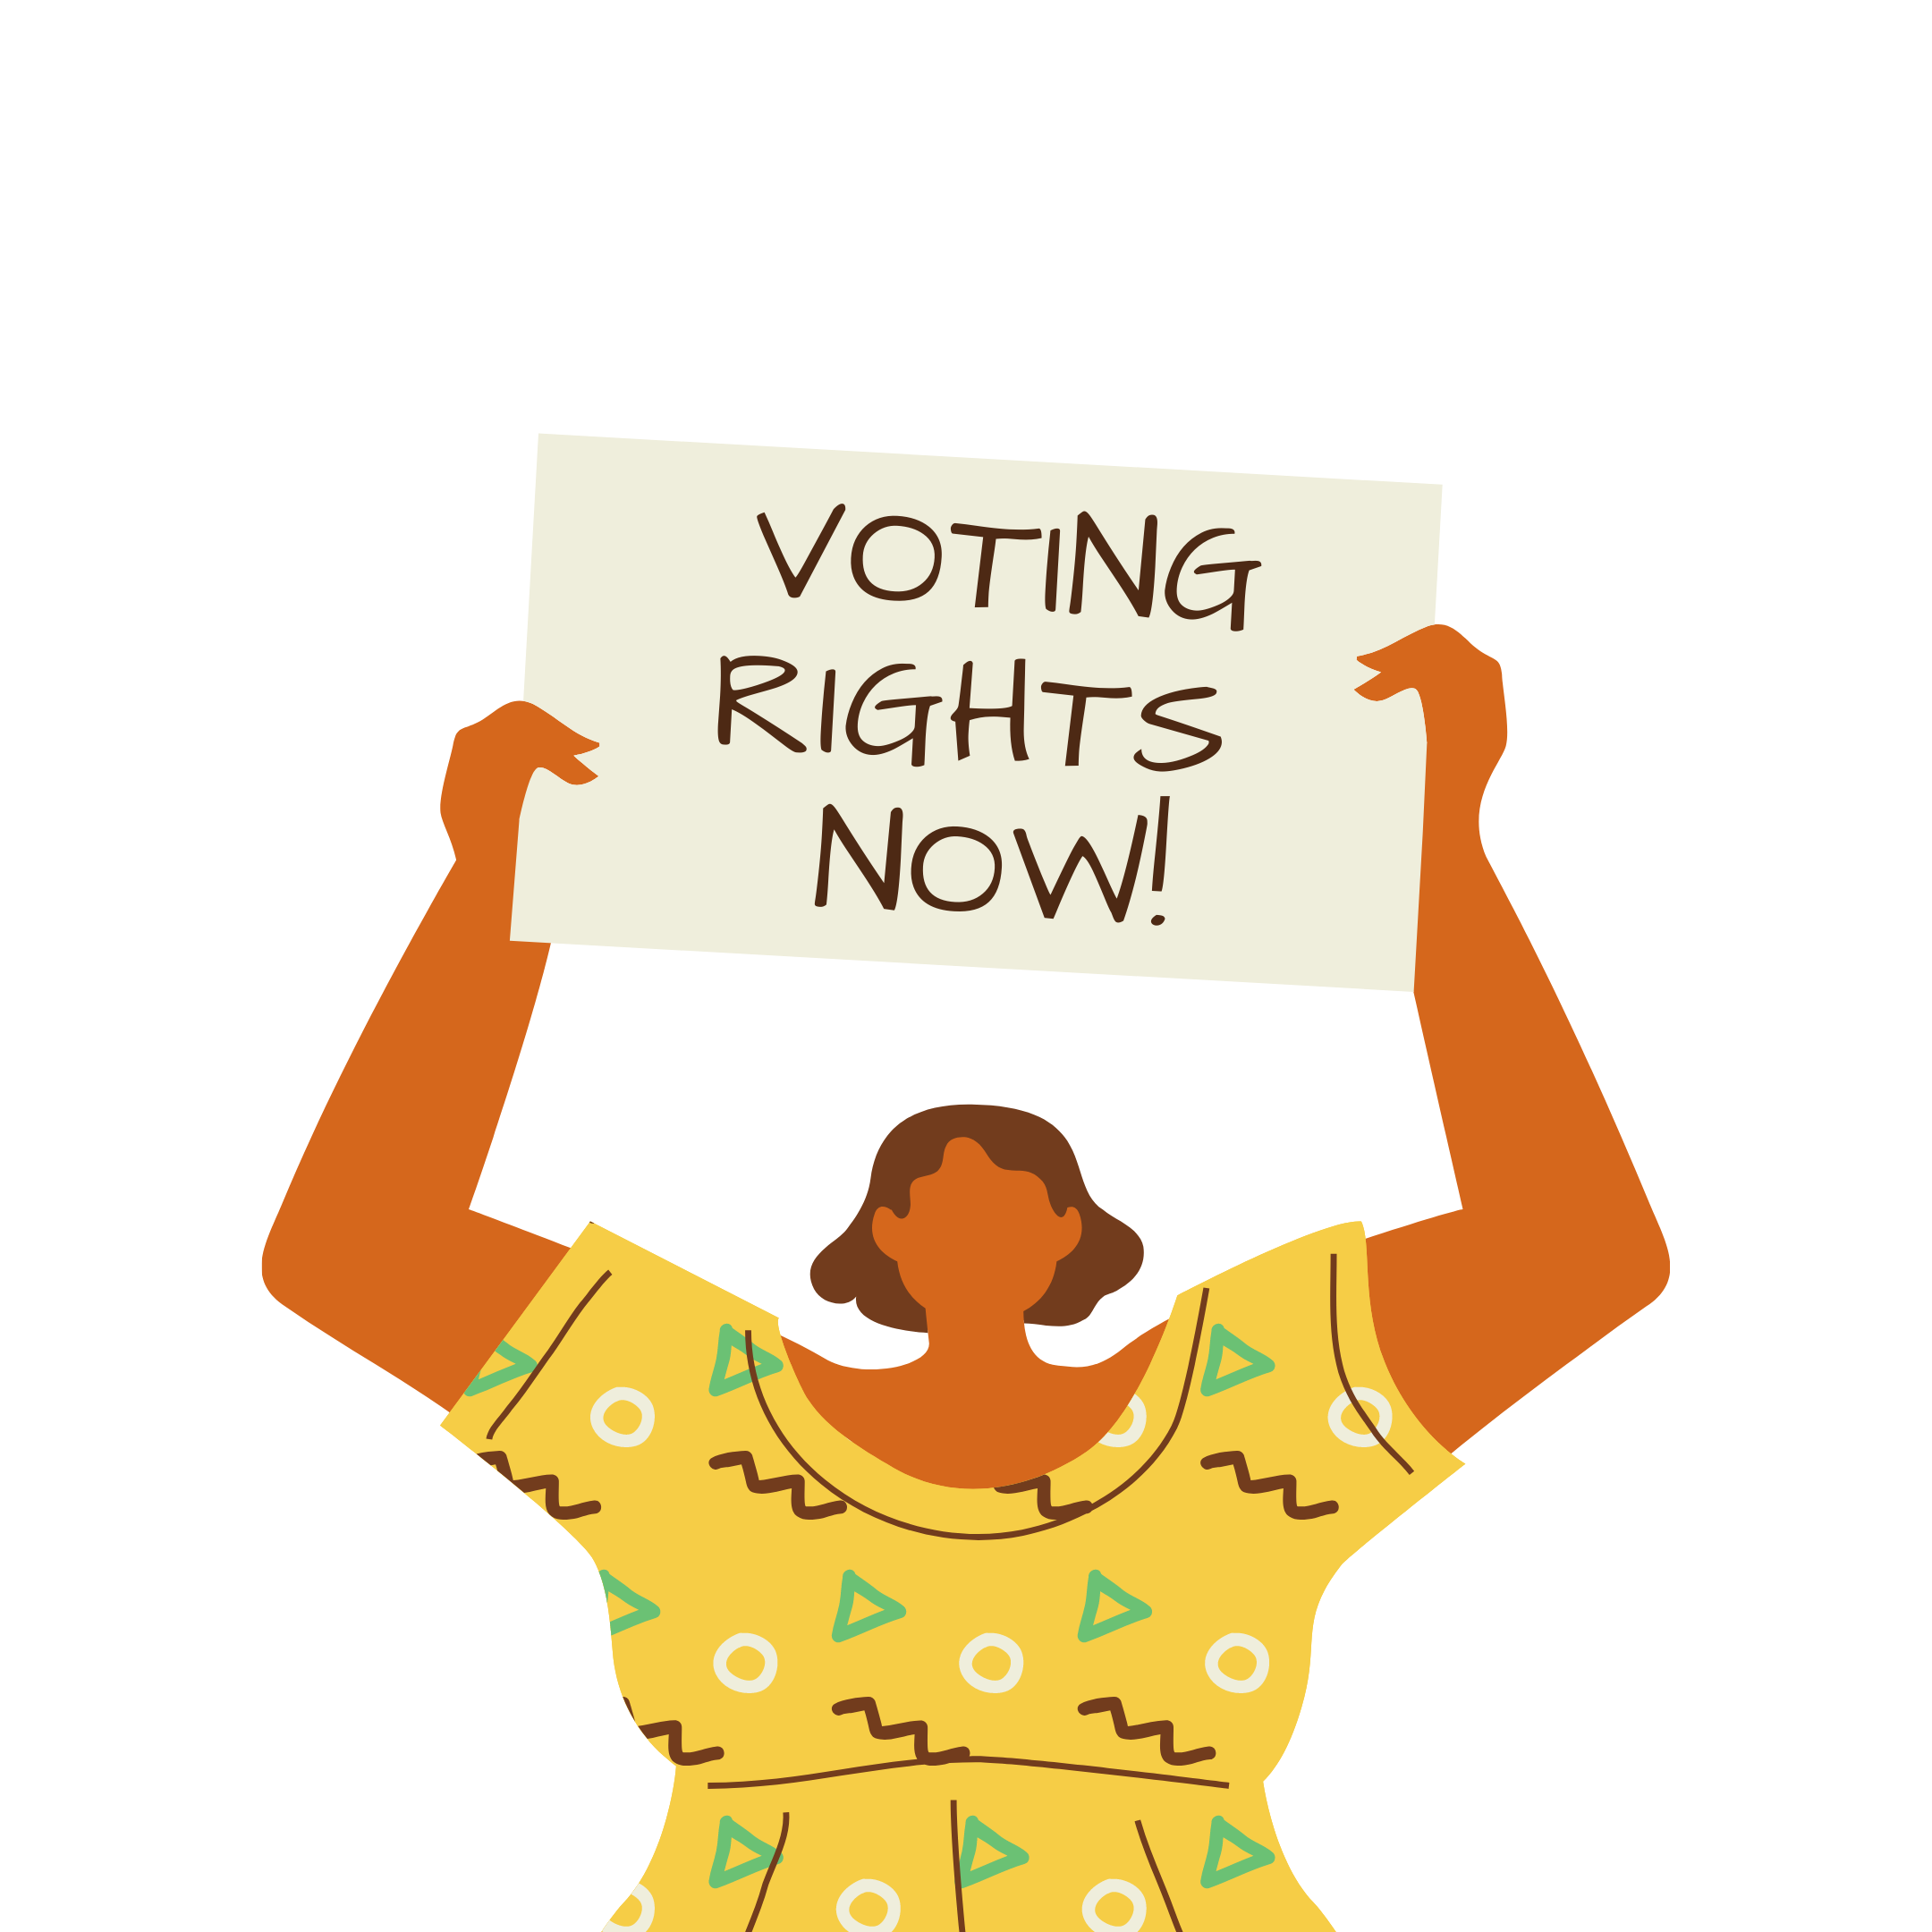 Voting Rights Now!